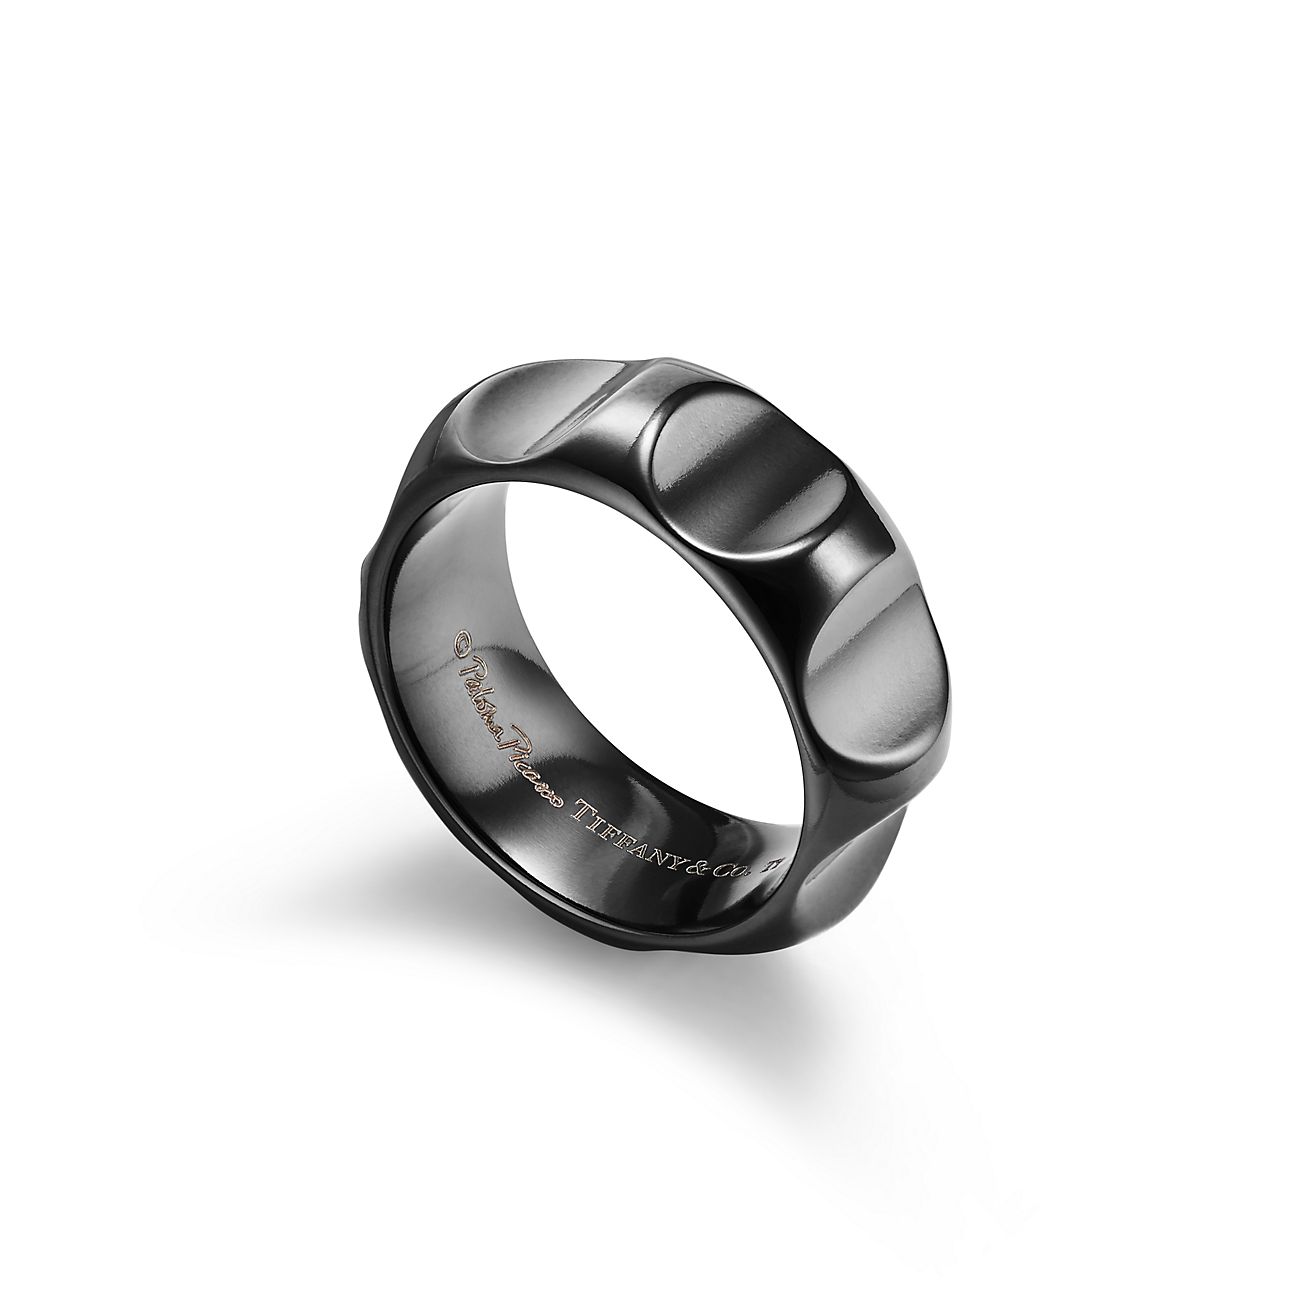 Paloma's Groove wide ring in titanium, 9 mm wide. | Tiffany & Co.